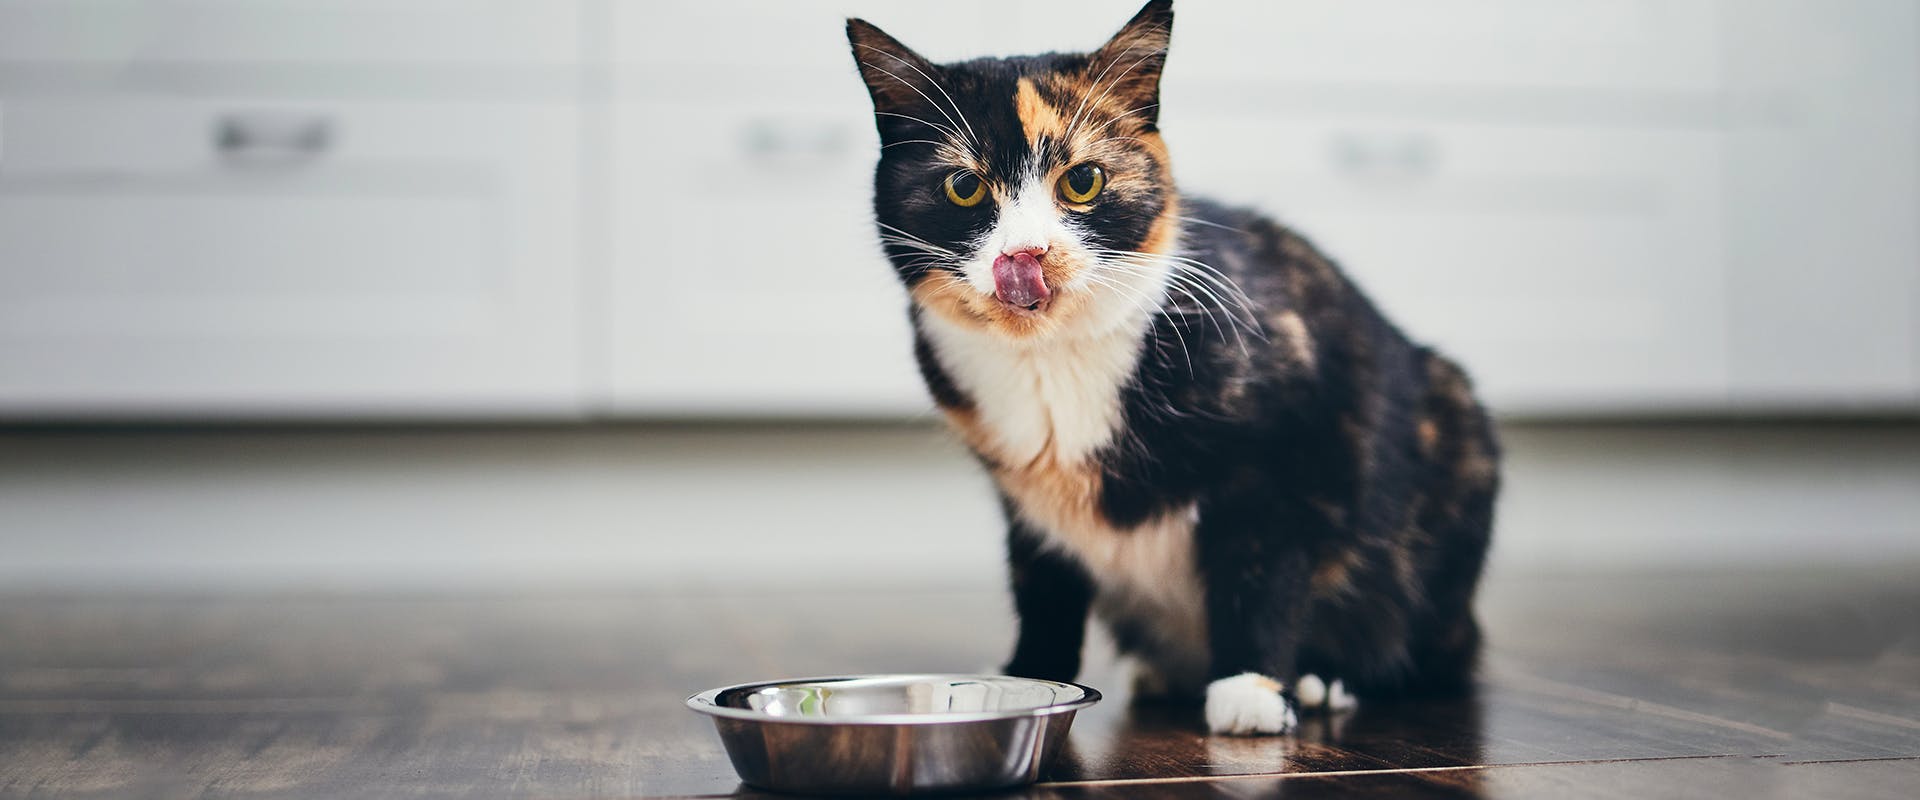 A cat licking its lips in a kitchen, an empty metal cat feeding bowl on the floor